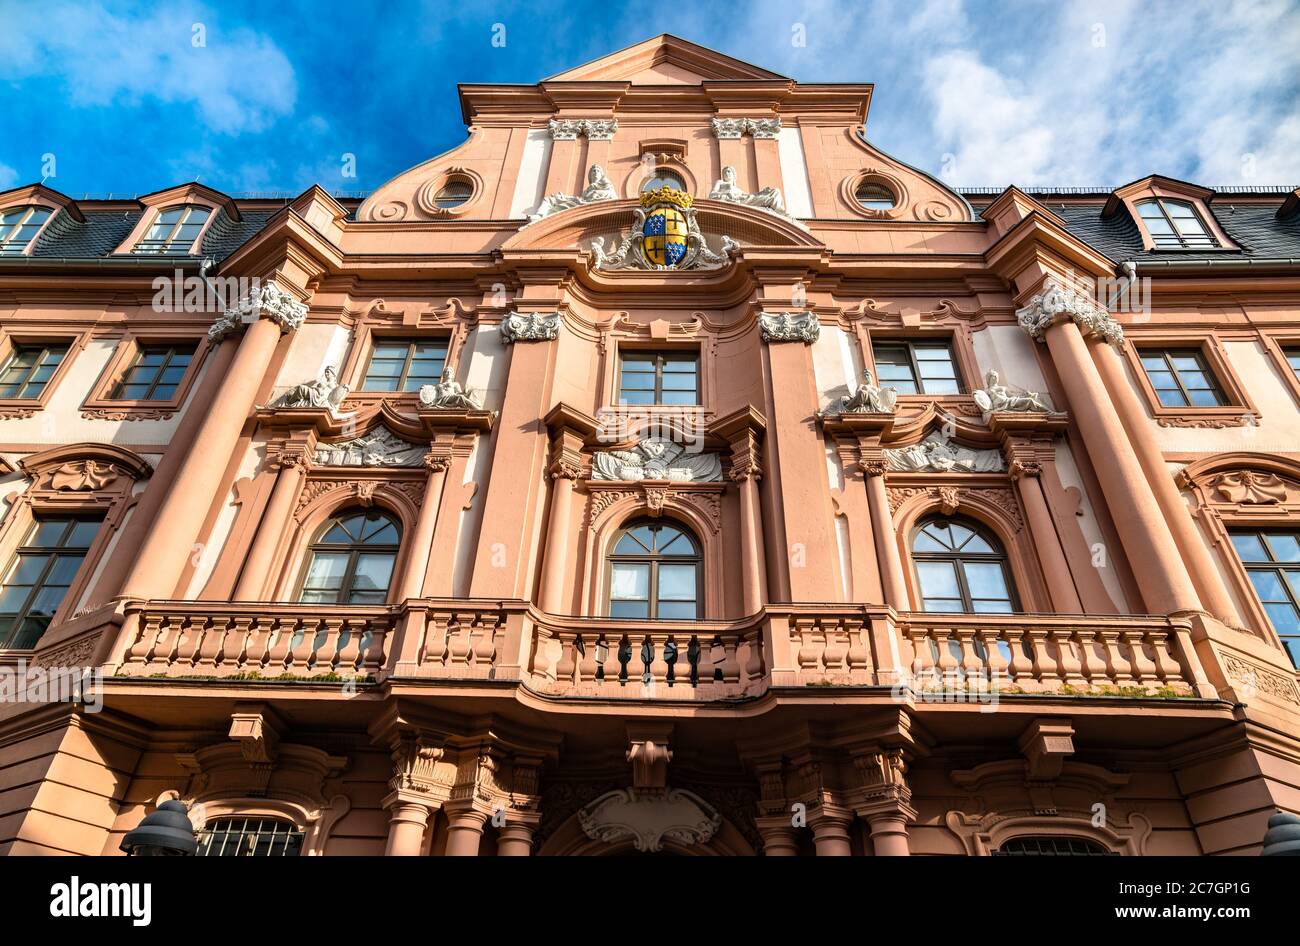 Traditional architecture in the old town of Mainz, Germany Stock Photo